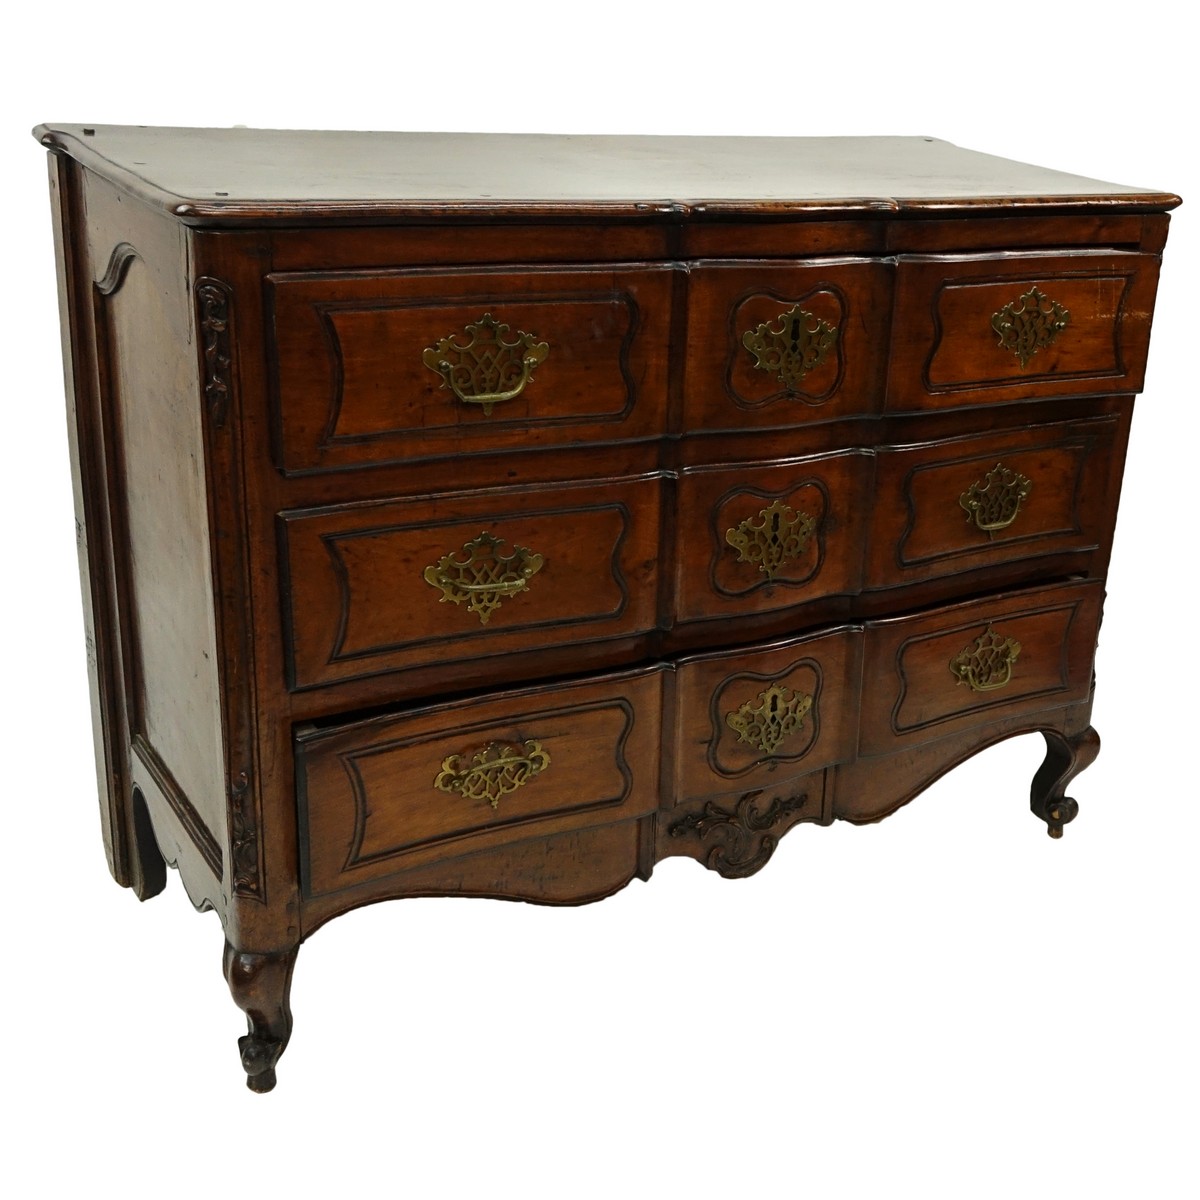 19th Century French Carved Walnut Commode/Chest of Drawers with Bronze Pulls. Three large fitted drawers and stands on front cabriole and rear bracket legs.